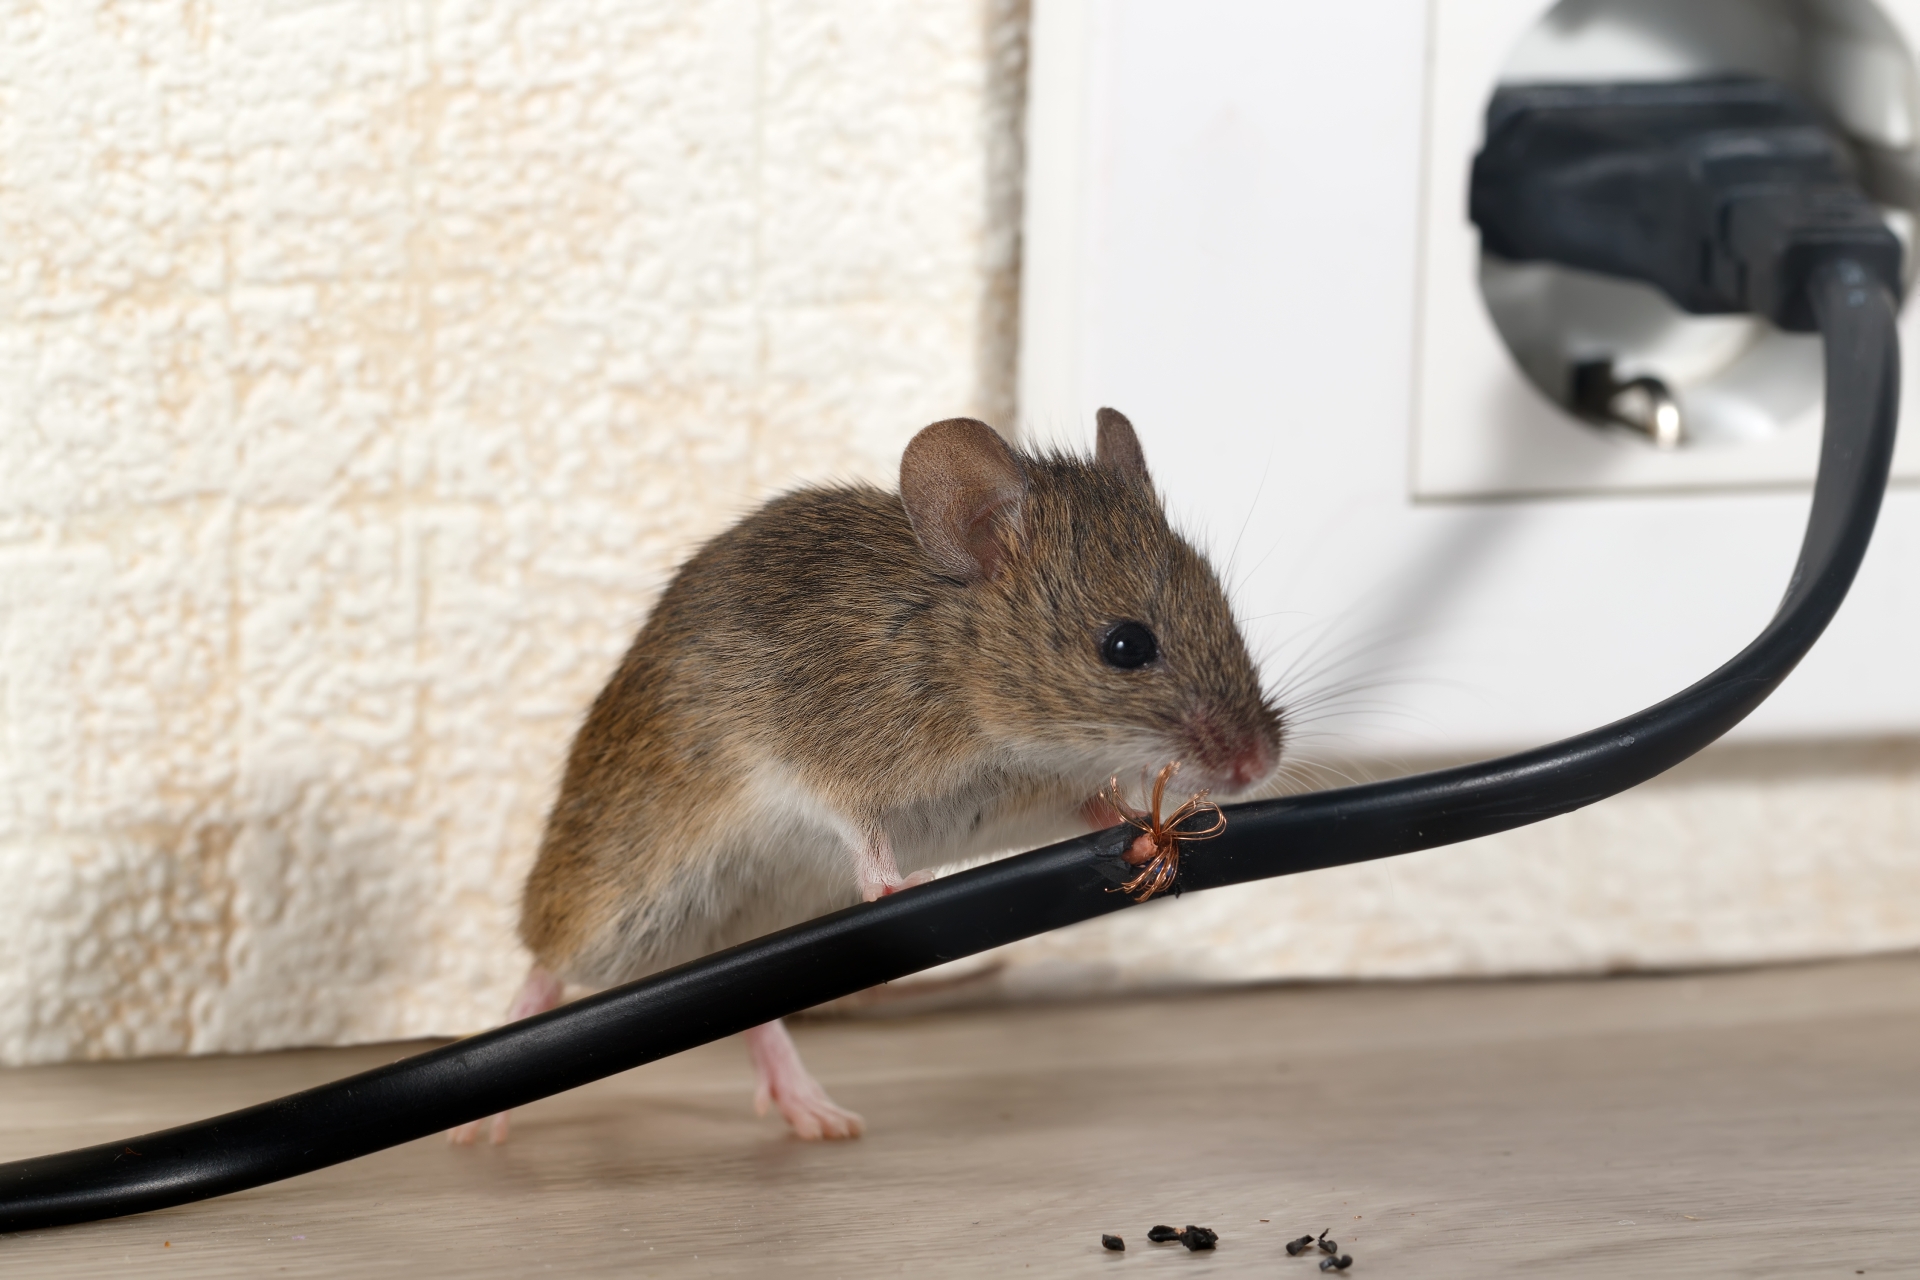 Mice Infestation, Pest Control in Wembley Park, HA9. Call Now 020 8166 9746